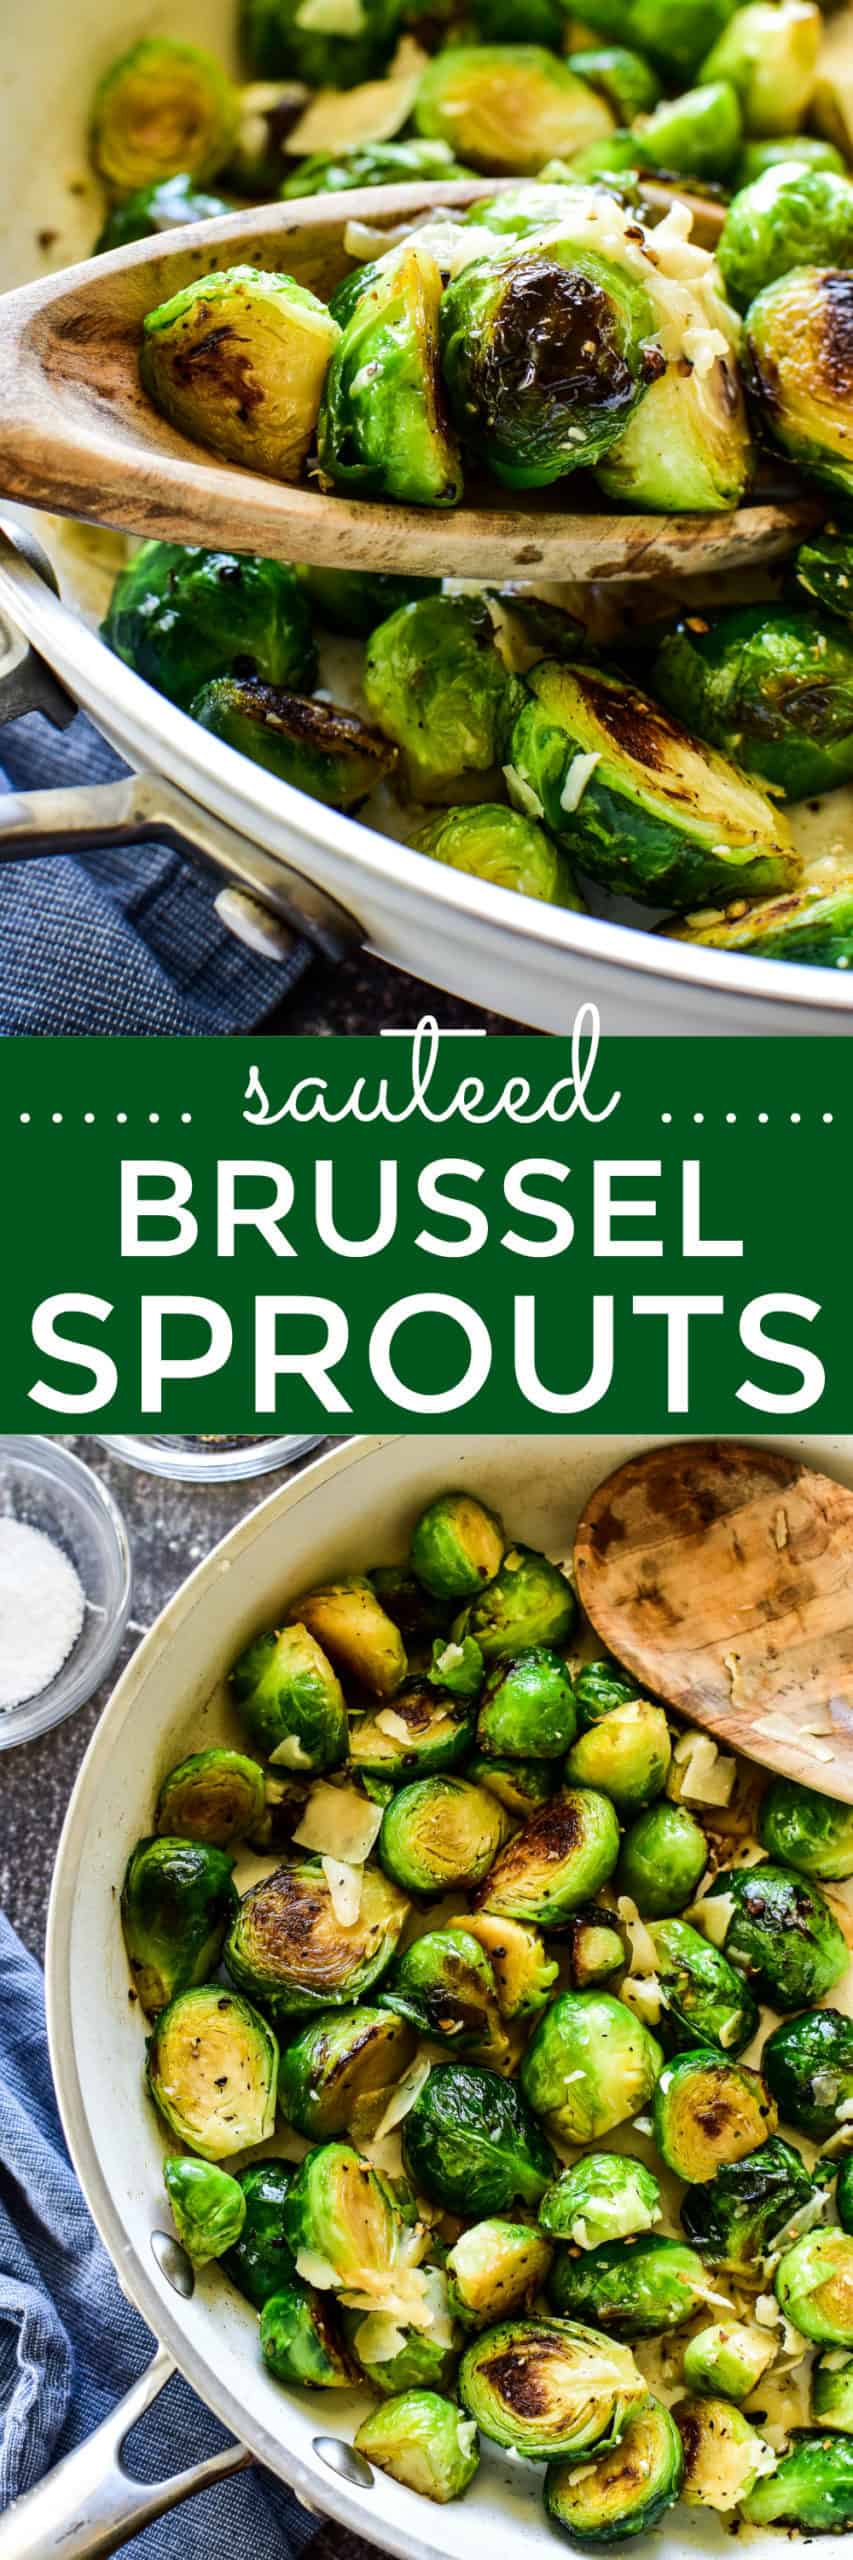 Collage image of brussel sprouts on spoon and in skillet